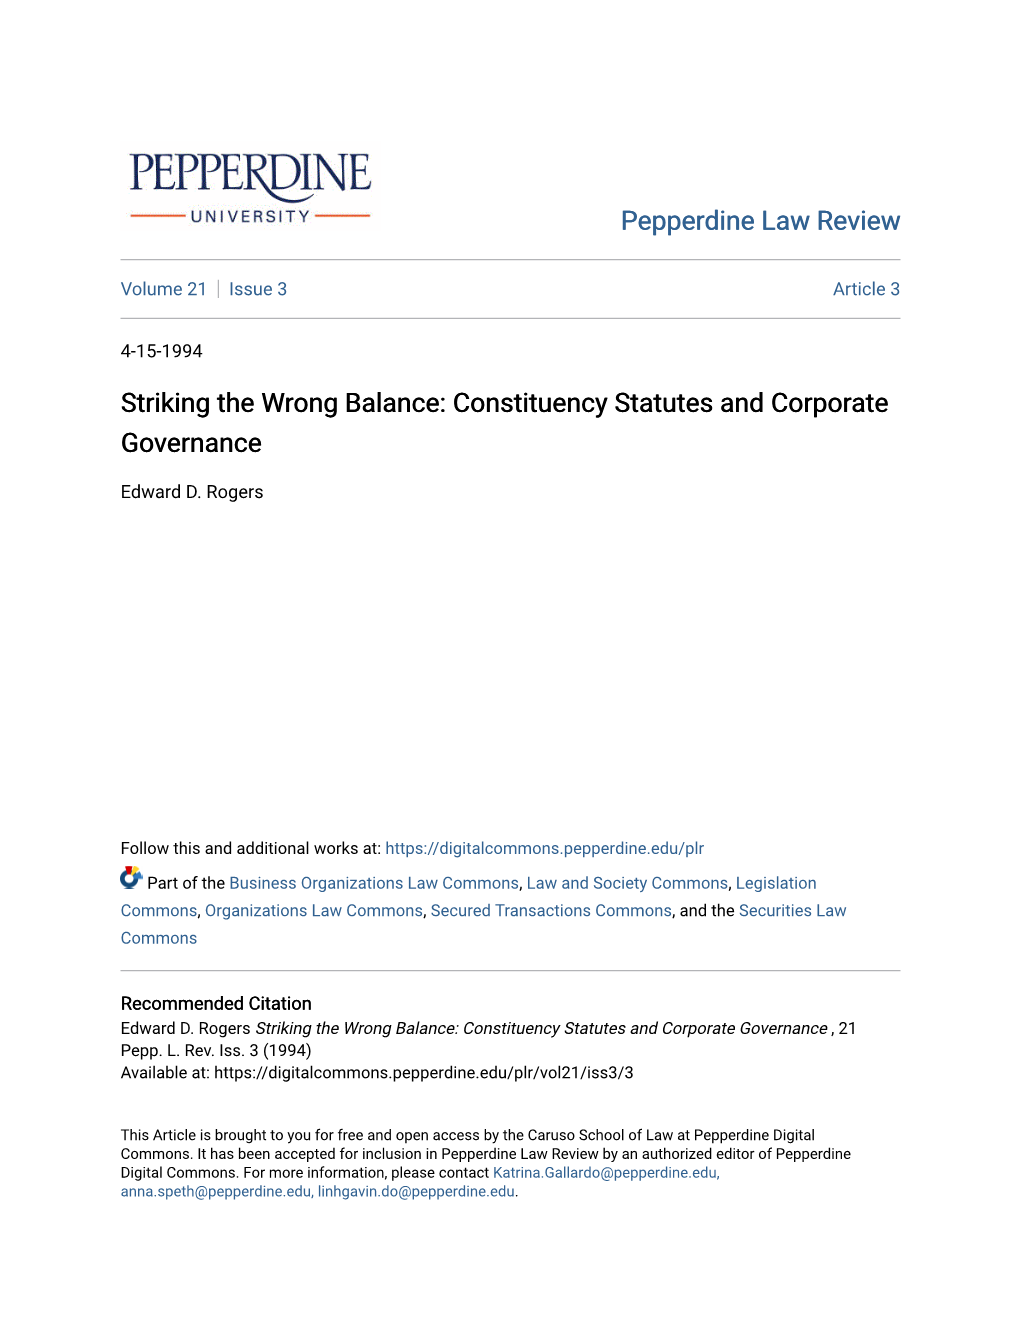 Constituency Statutes and Corporate Governance